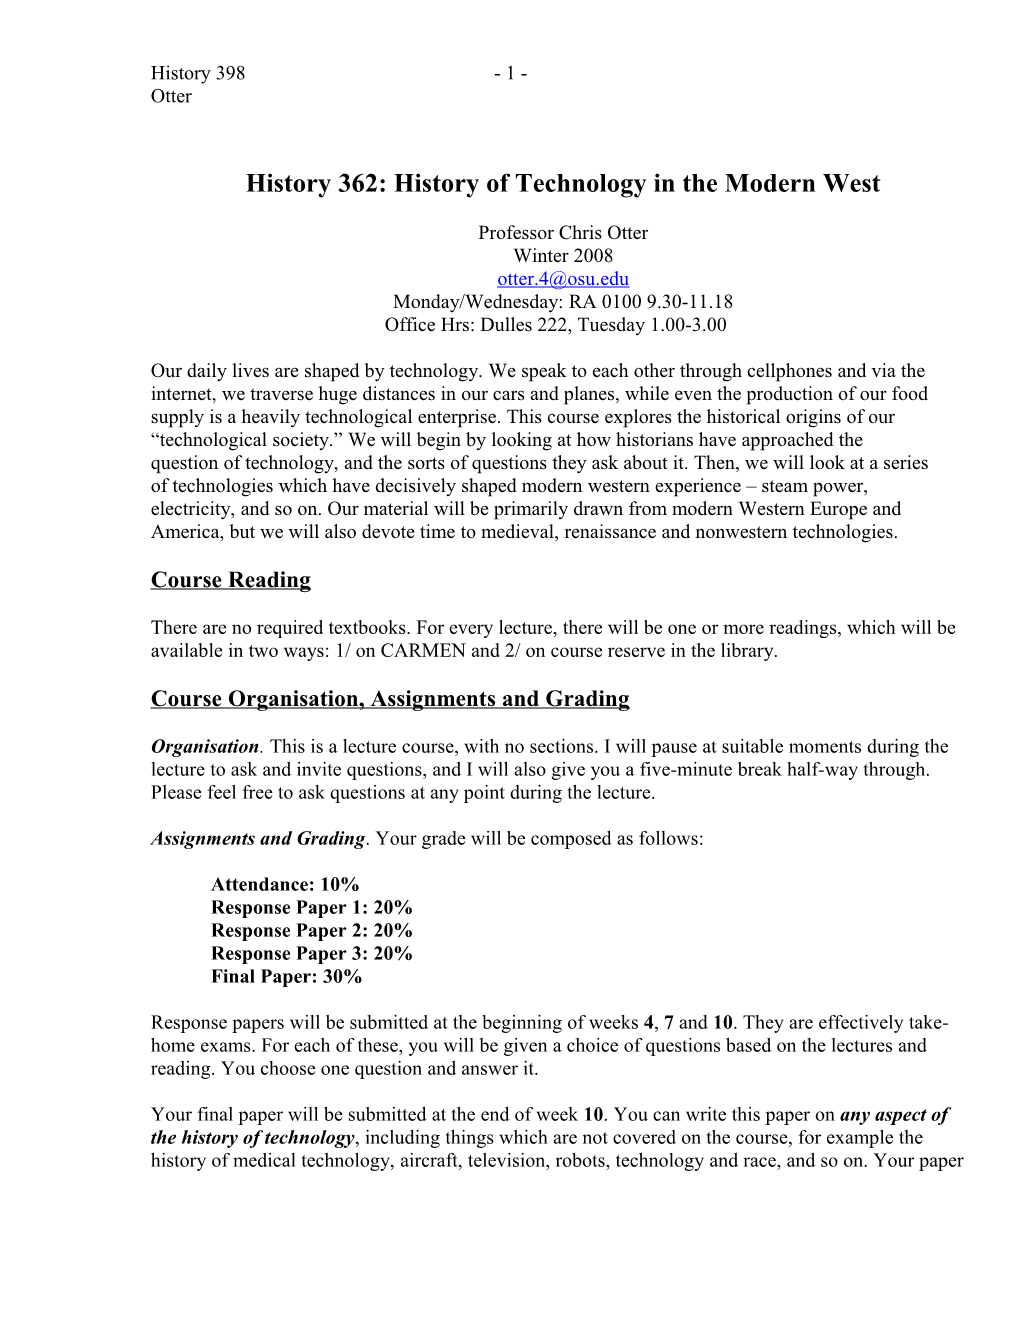 History 362: History of Technology in Modern Europe